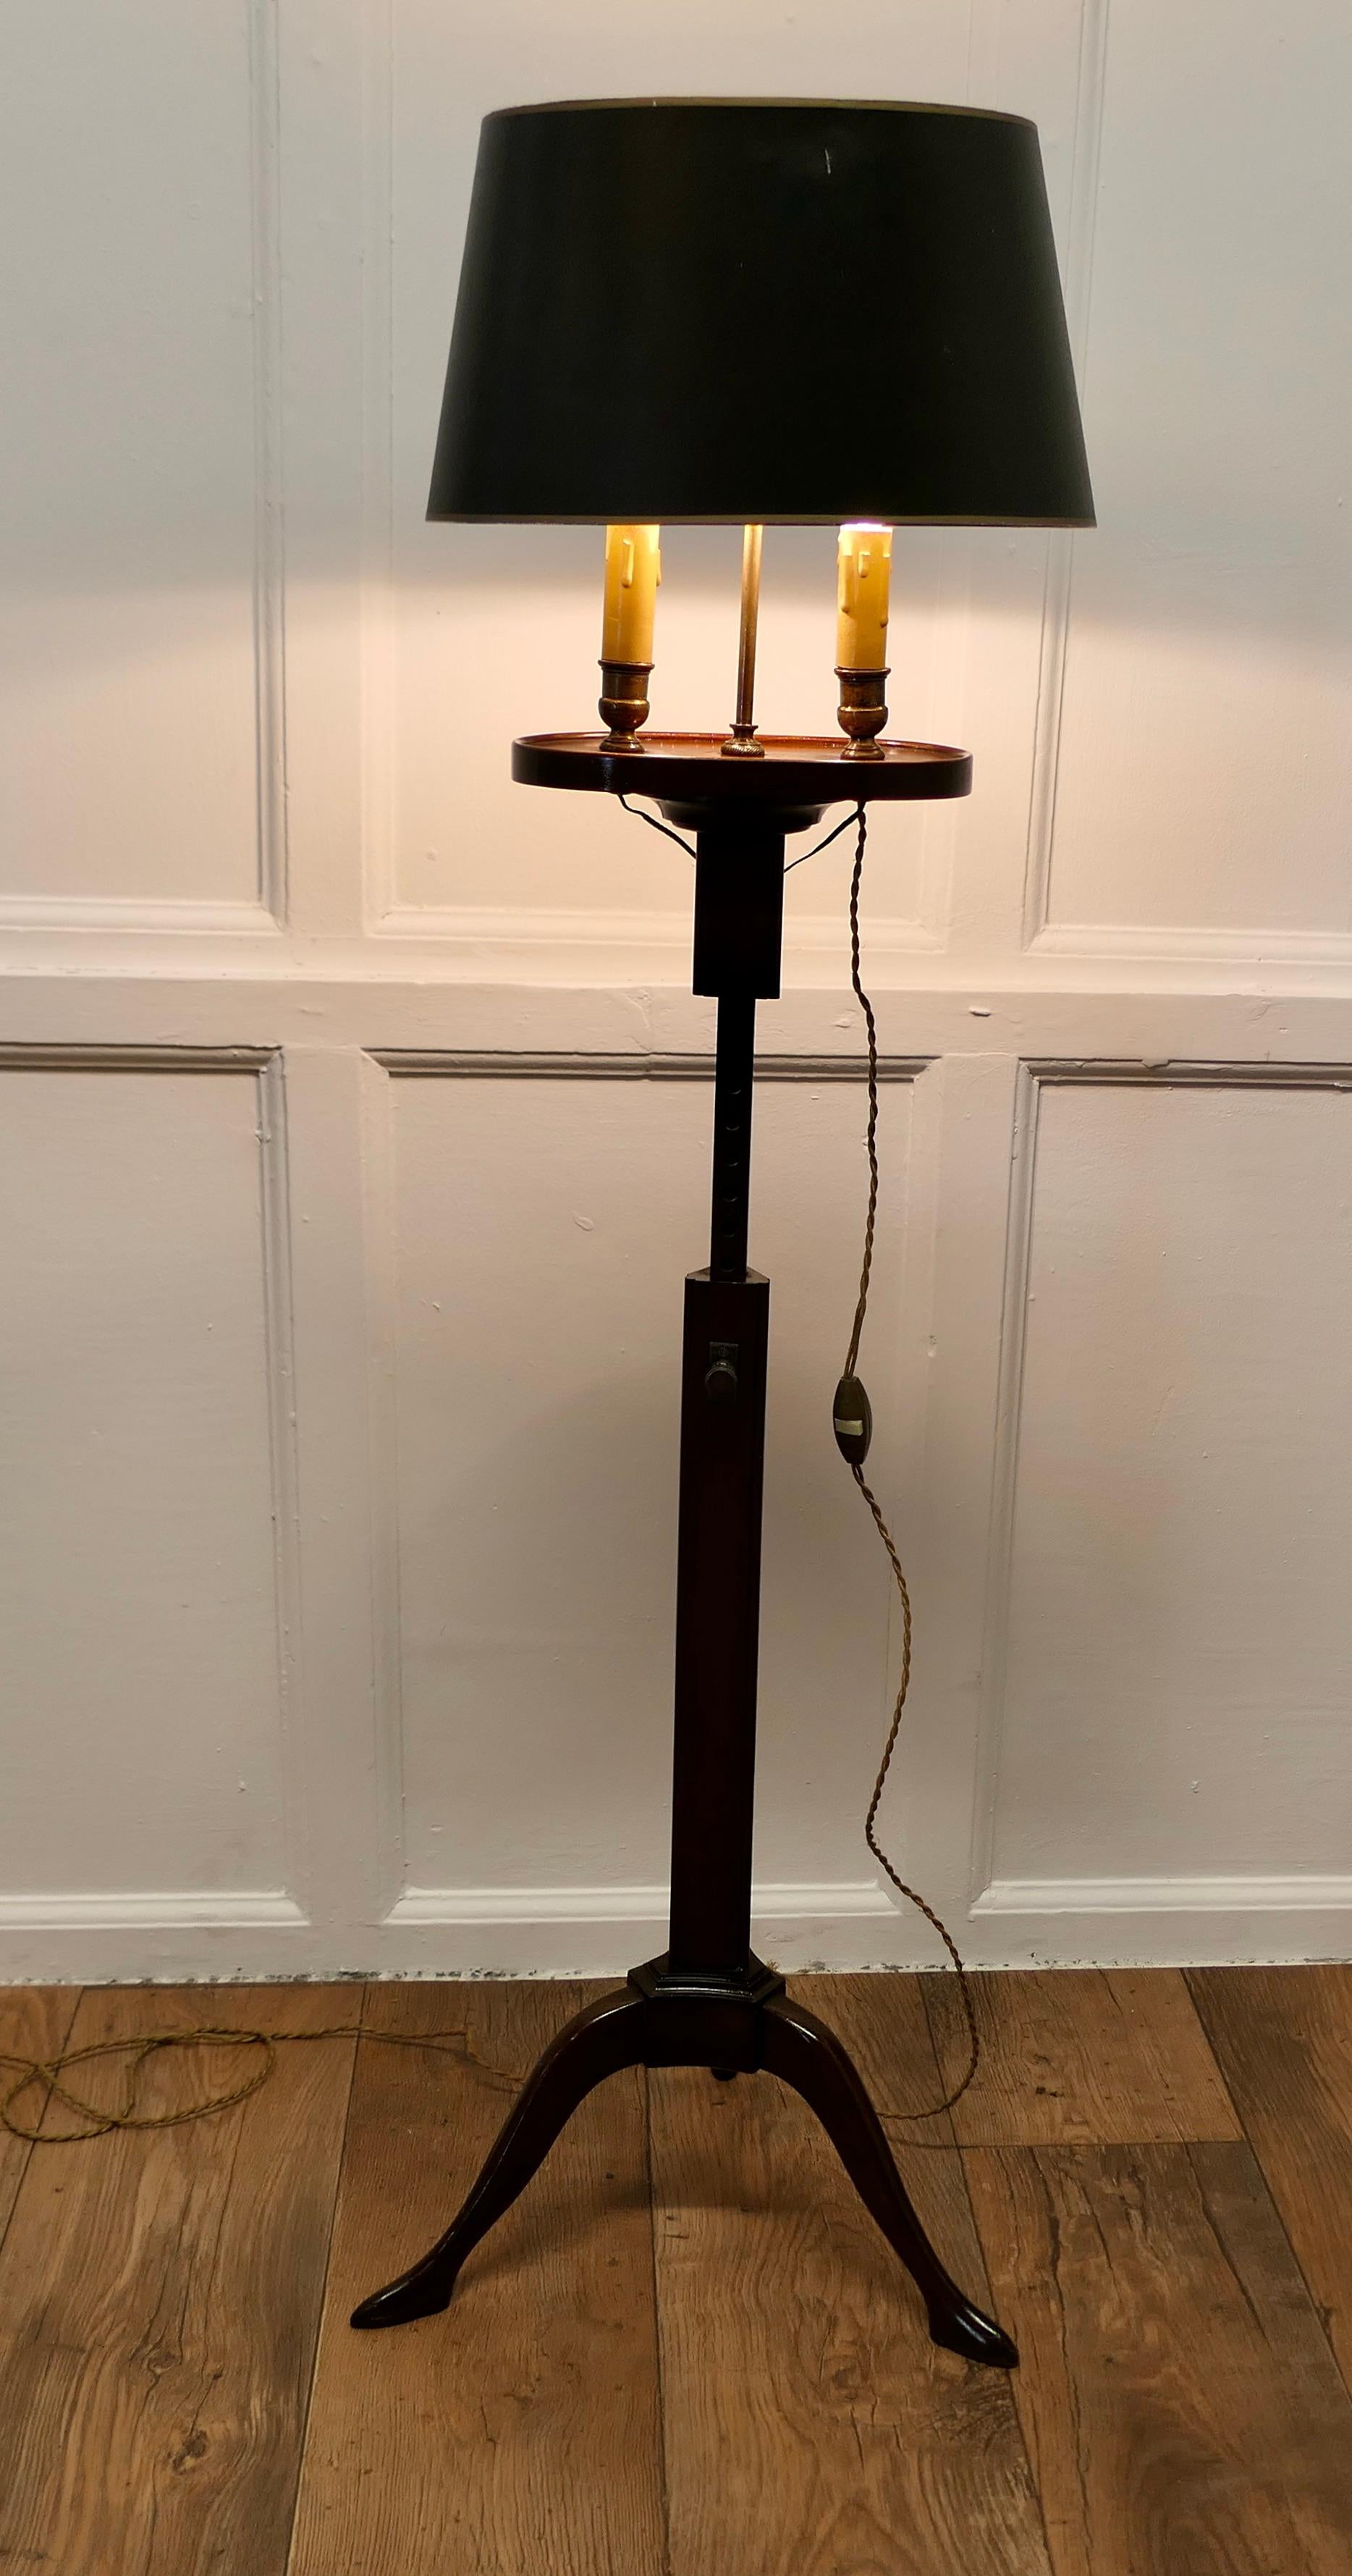 French Provincial Bouillotte Floor Lamp, Adjustable Twin Candle Lamp This is an Elegant Piece For Sale